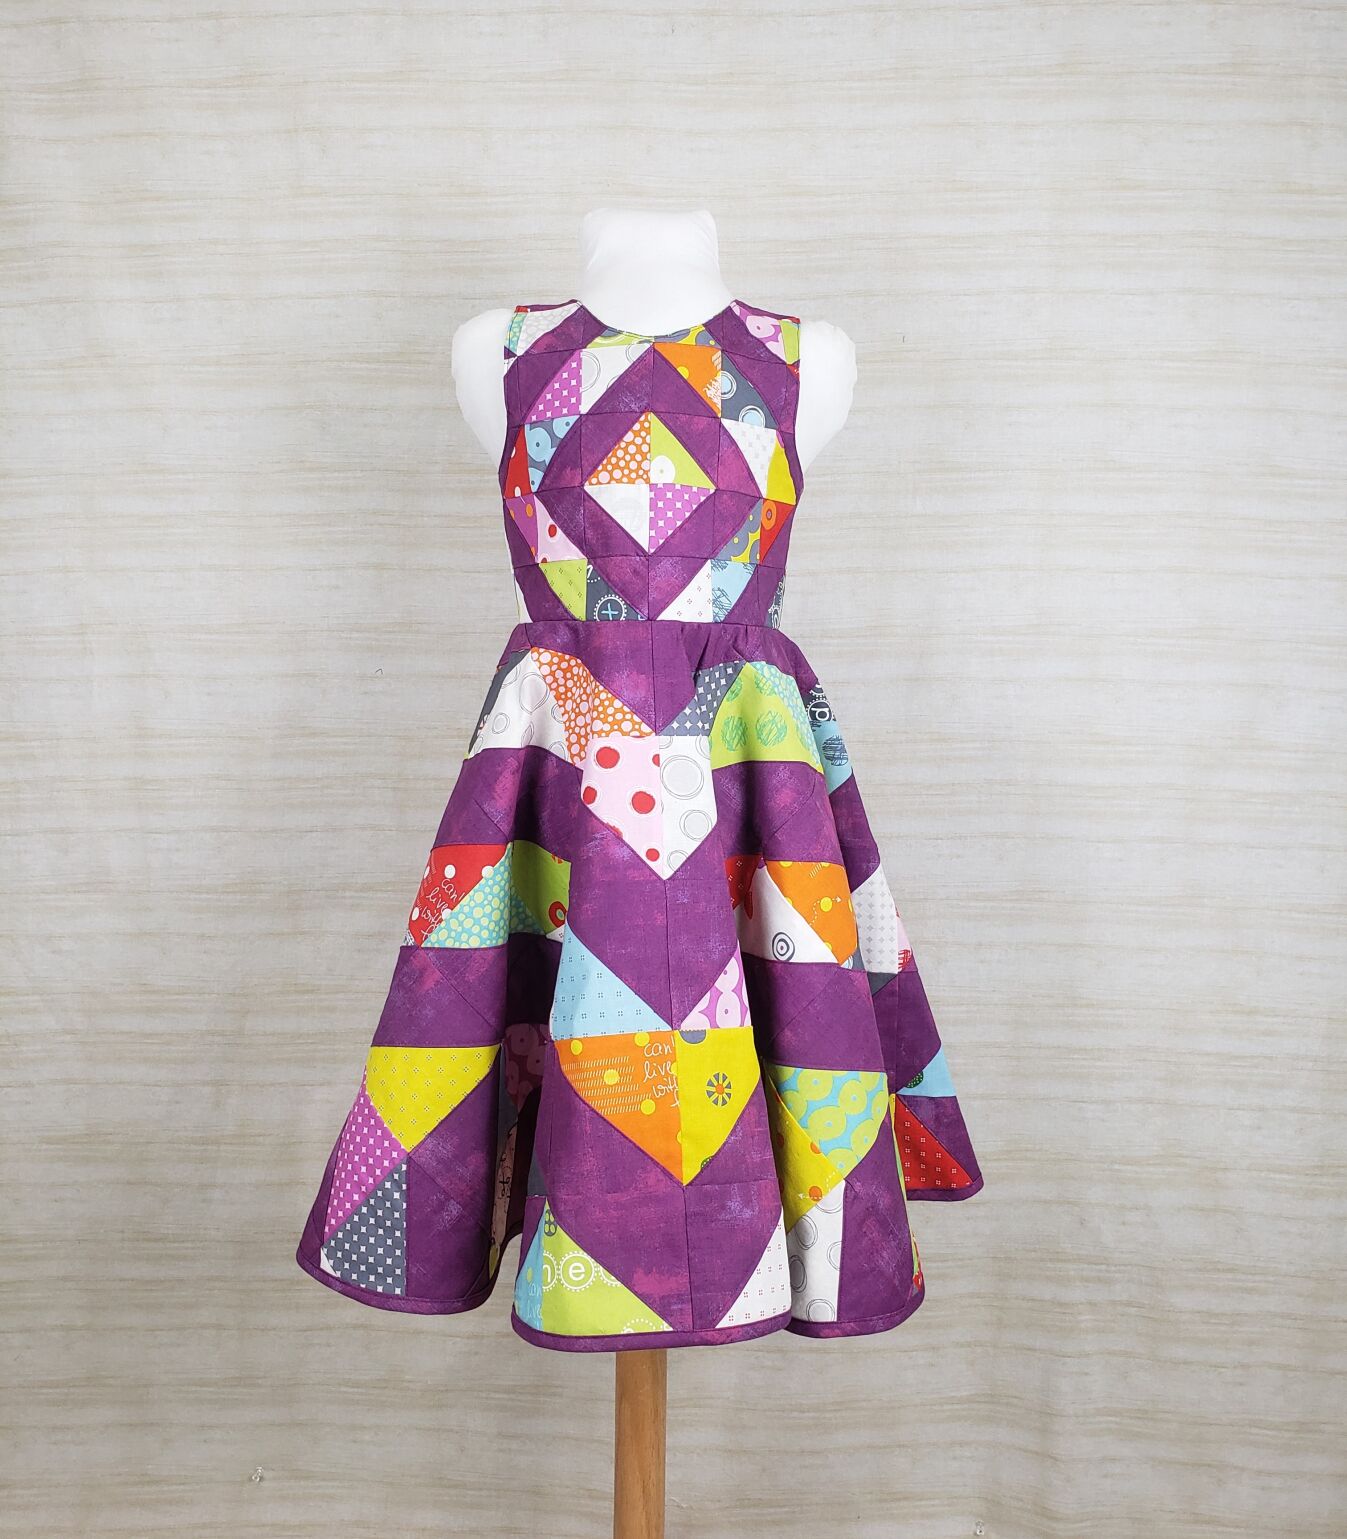 Photos: Turning quilts into clothes